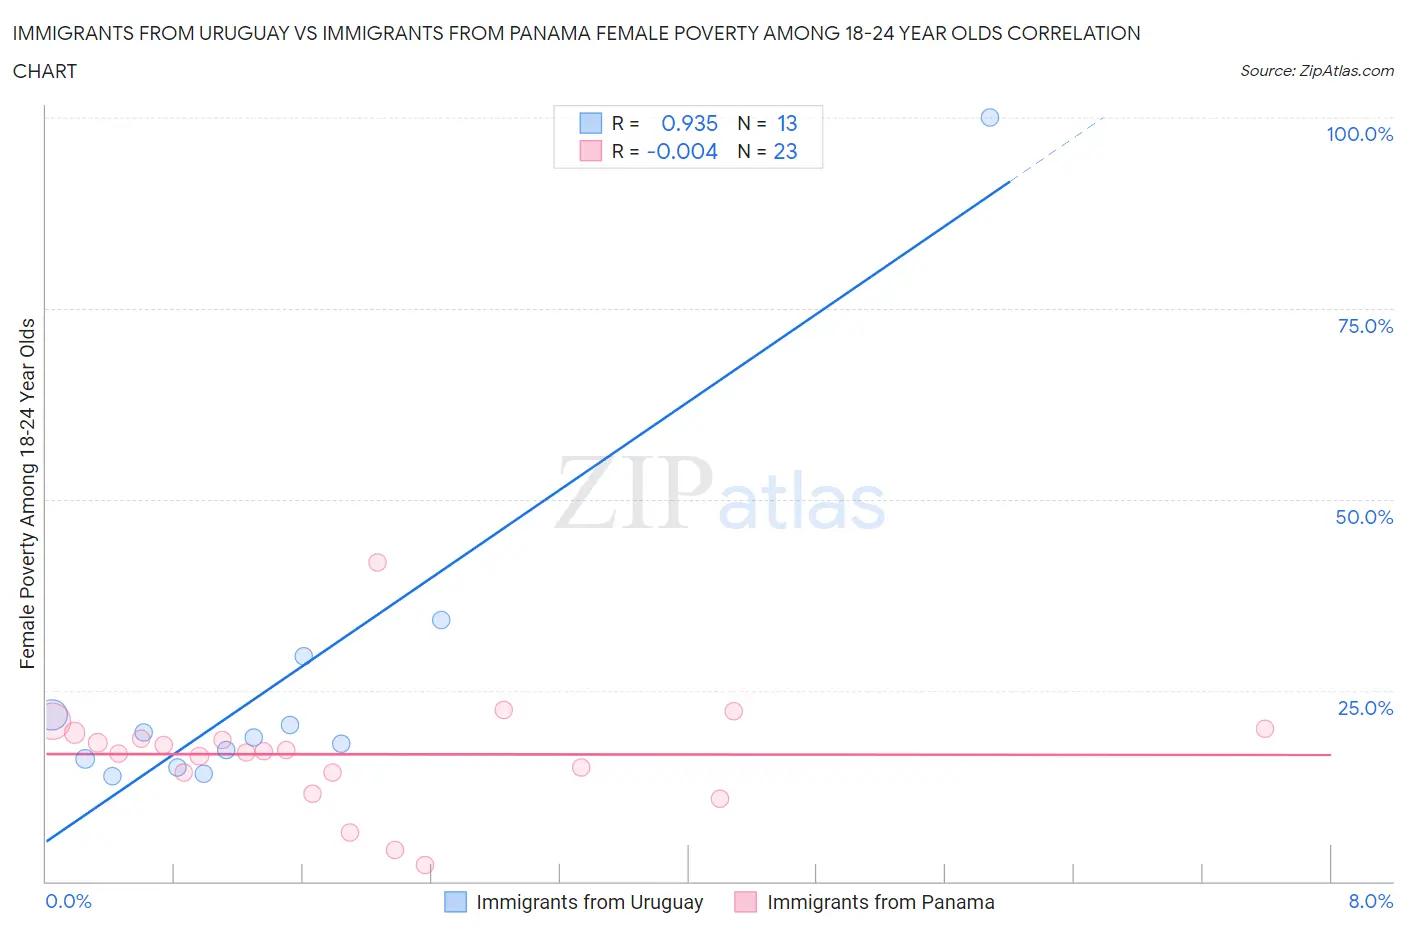 Immigrants from Uruguay vs Immigrants from Panama Female Poverty Among 18-24 Year Olds